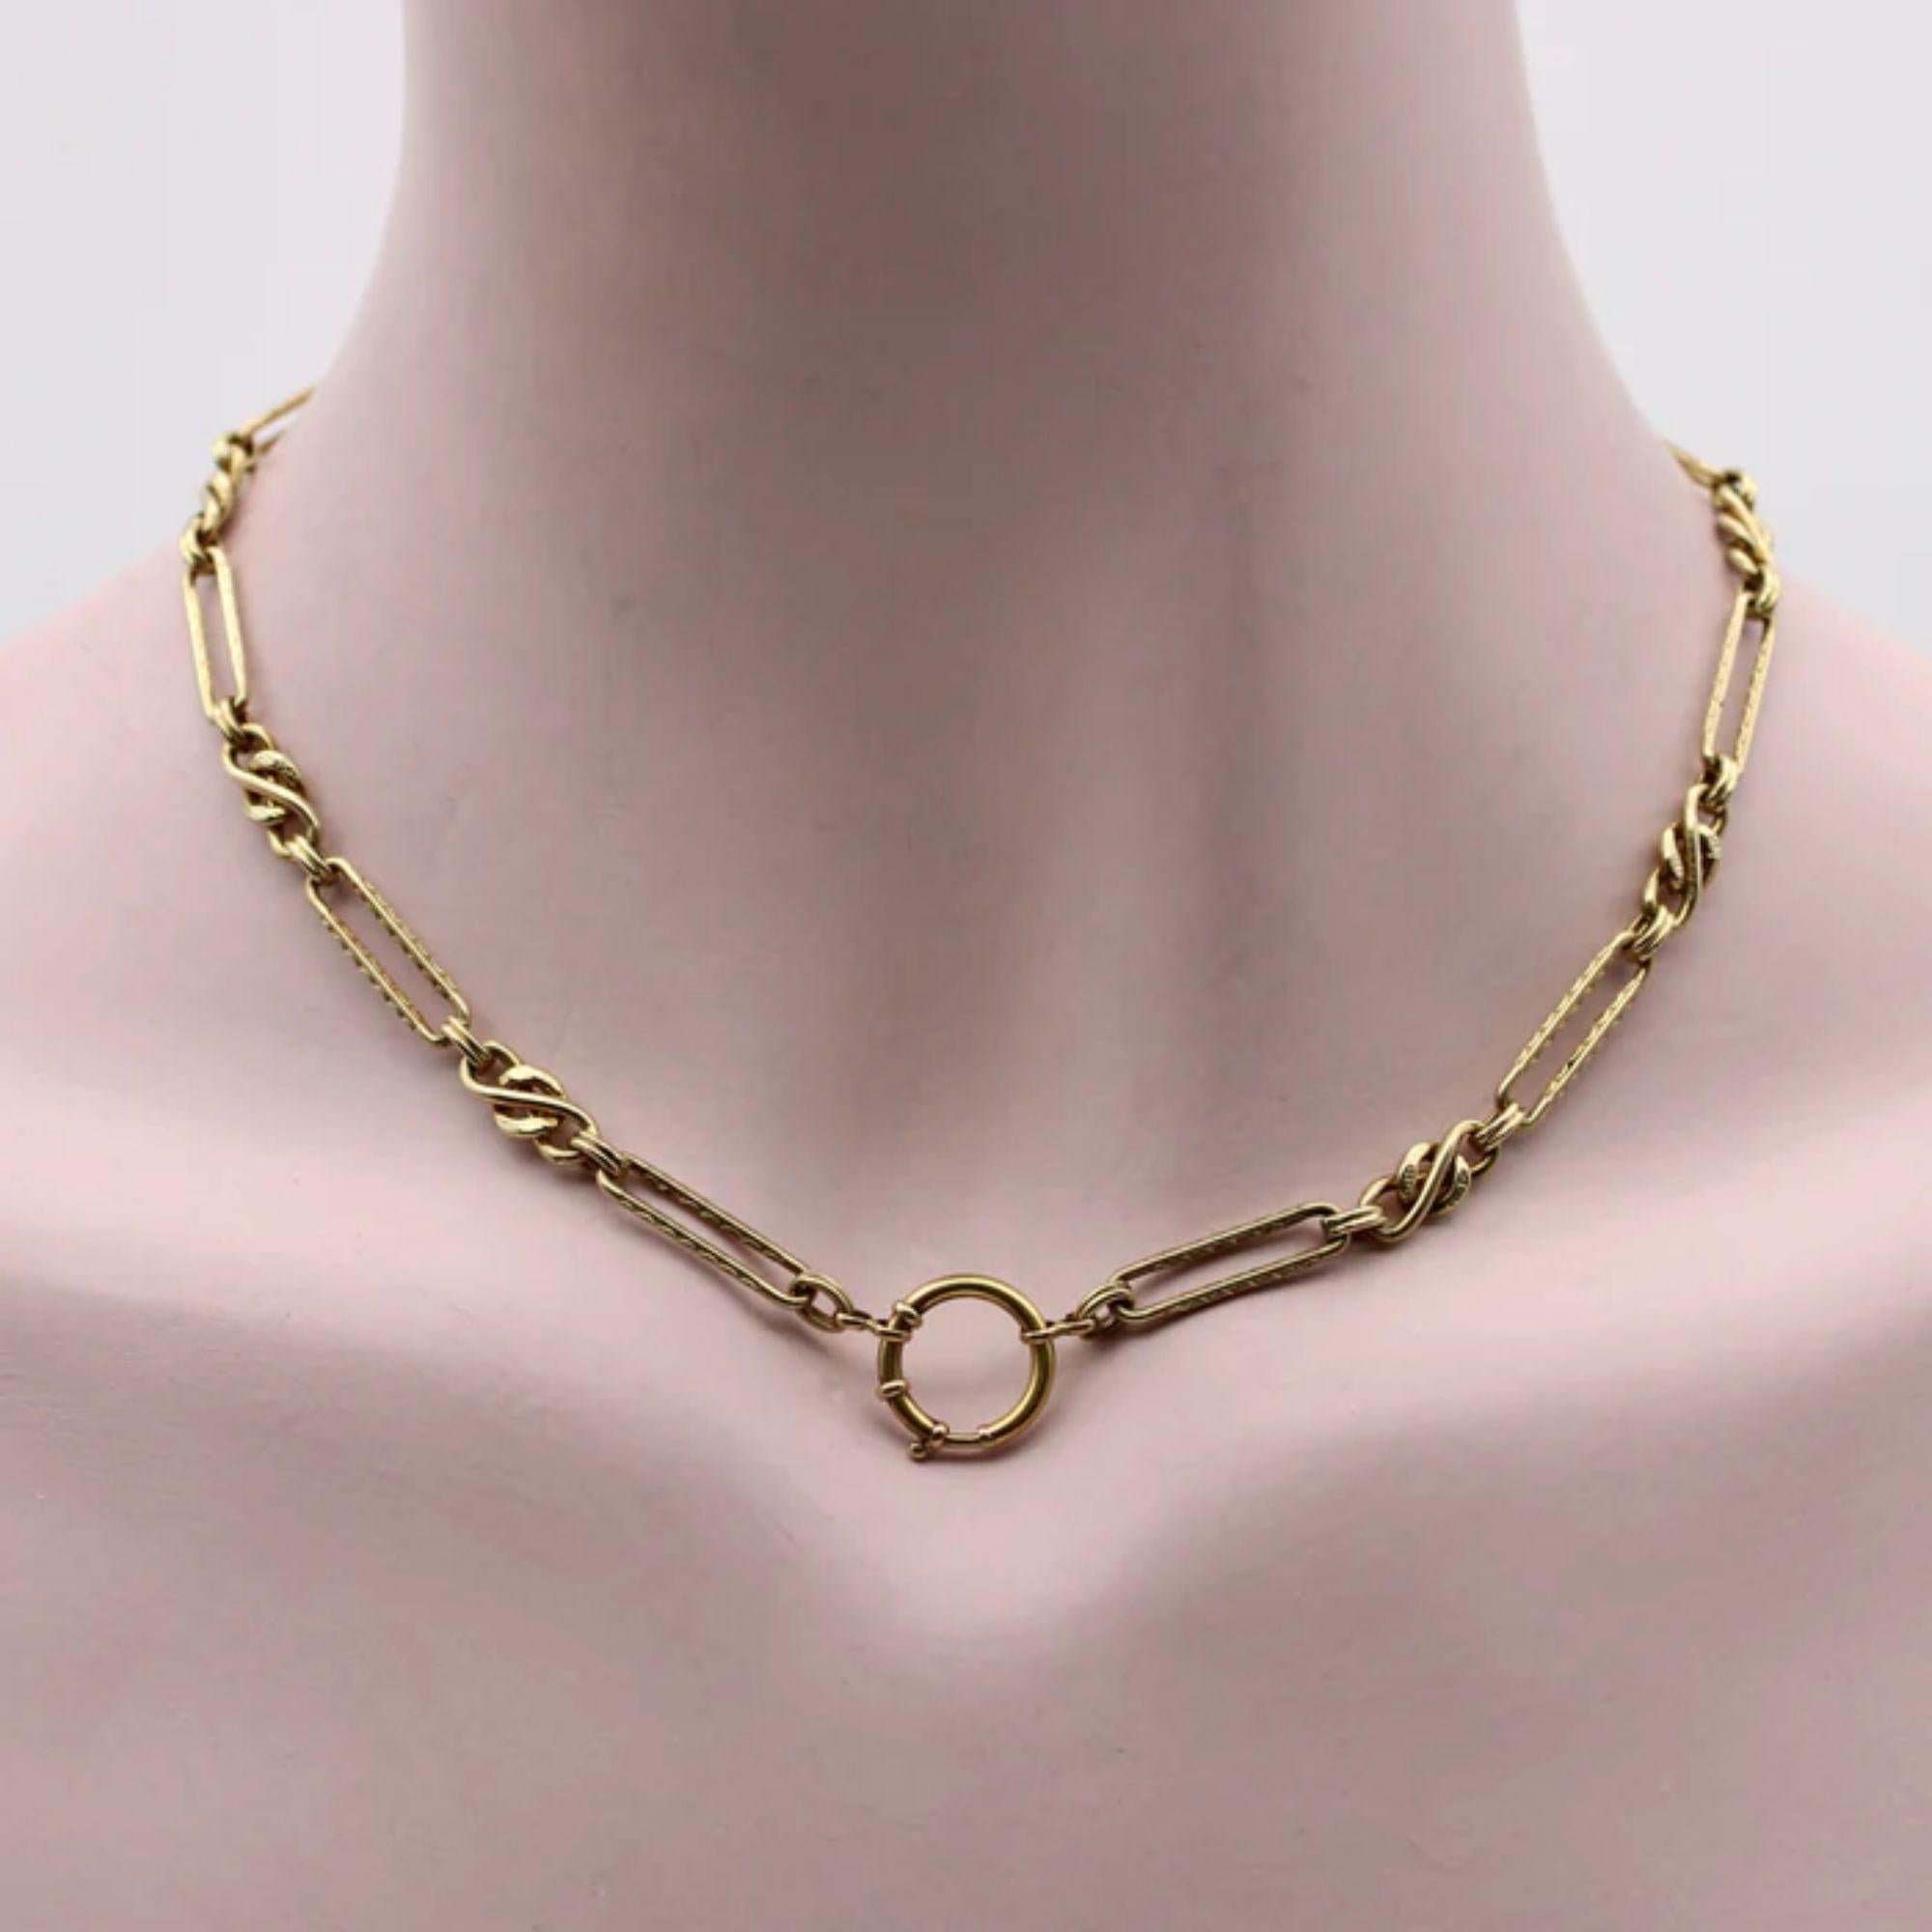 Contemporary Signature Victorian Inspired 14K Gold Fancy Link Chain